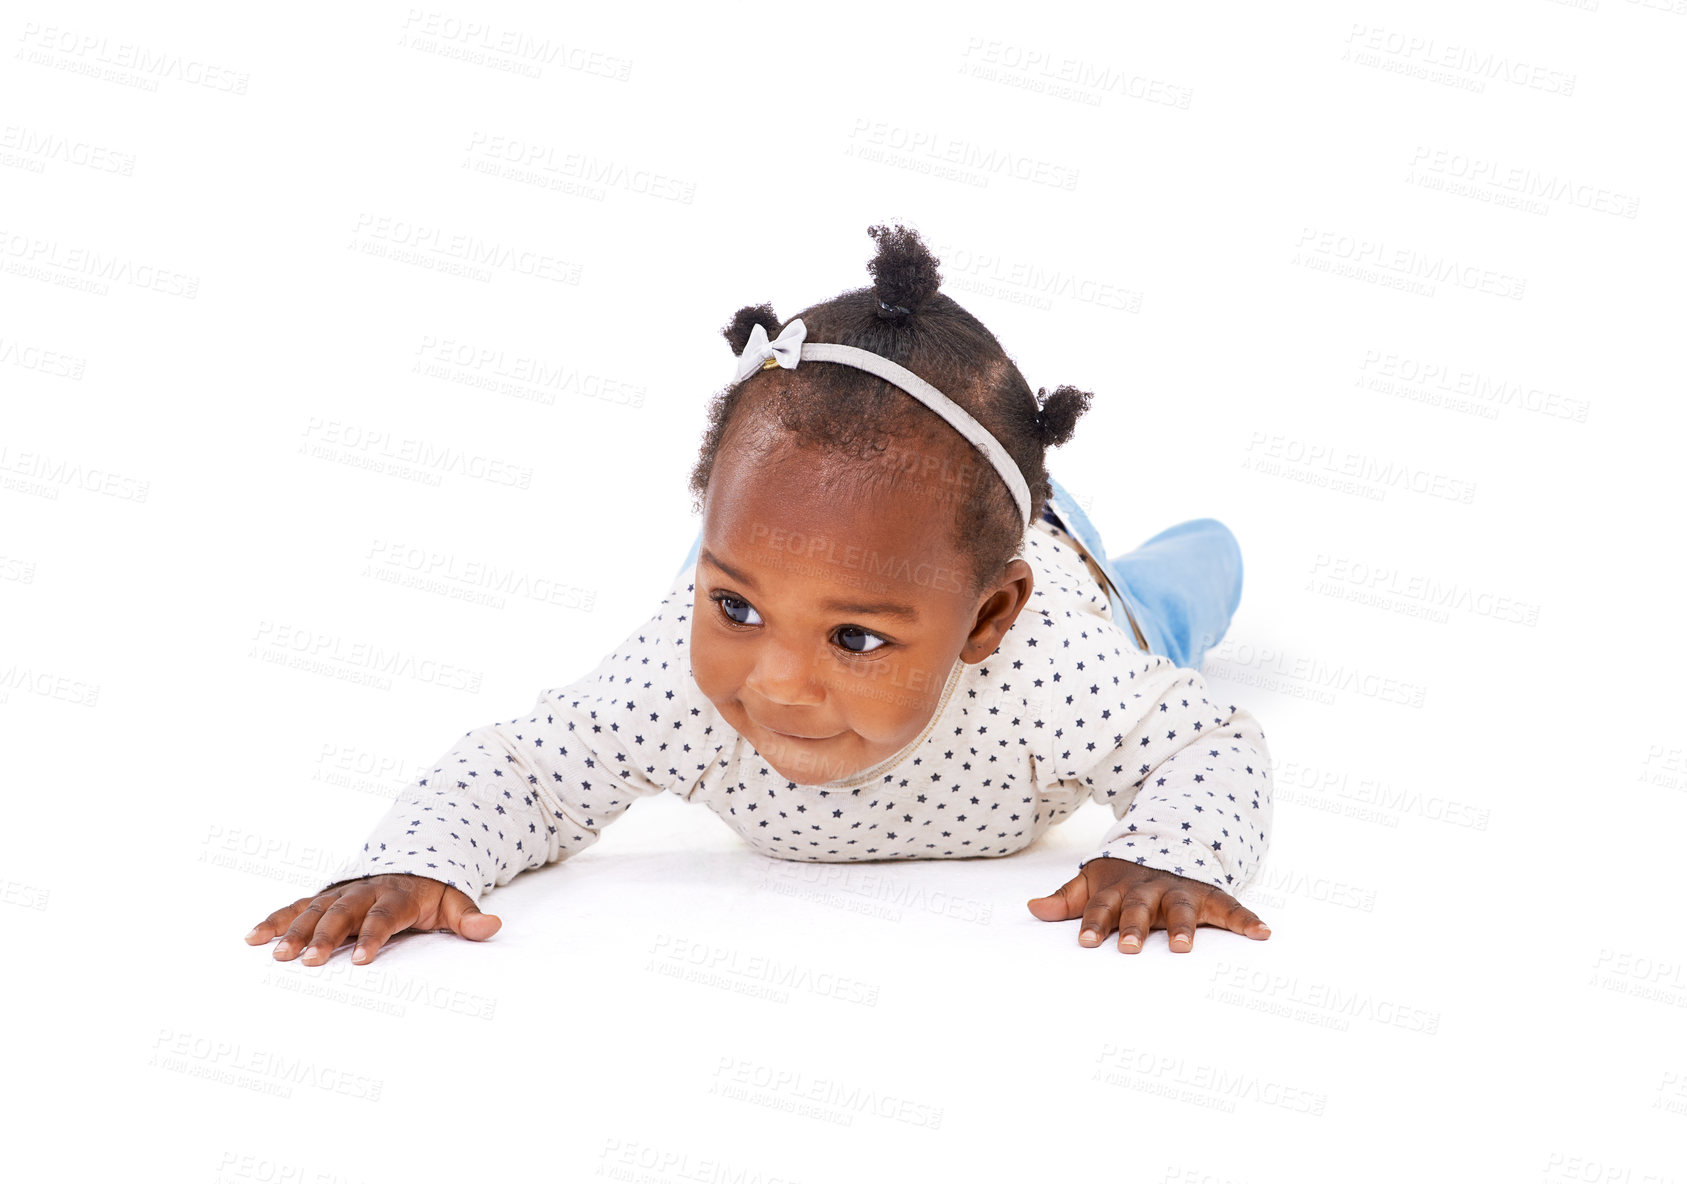 Buy stock photo Black baby, curious or crawl to explore, play or learn of mobility, motor skill or child development. Girl, toddler or crawling on tummy time, growth or progress on mockup on white background